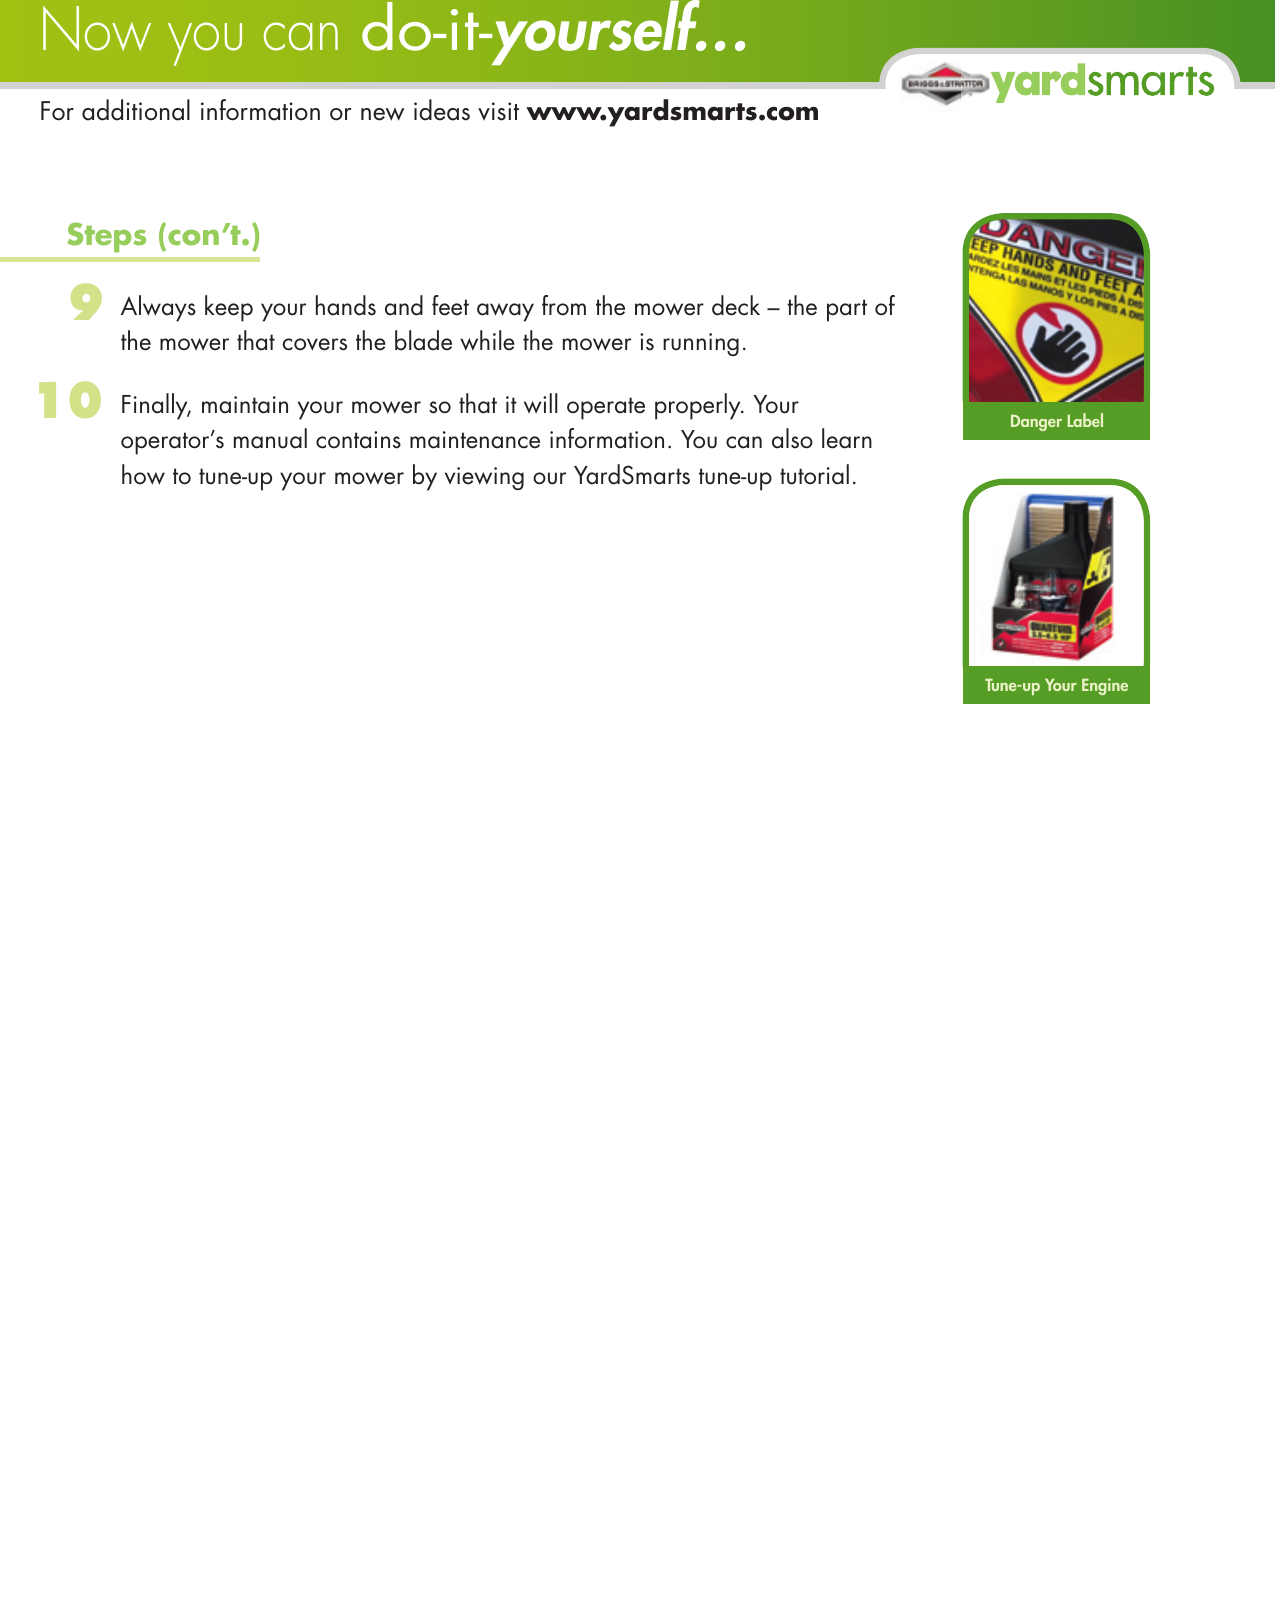 Page 3 of 3 - !! Yard Smarts-DIY Mower Safety